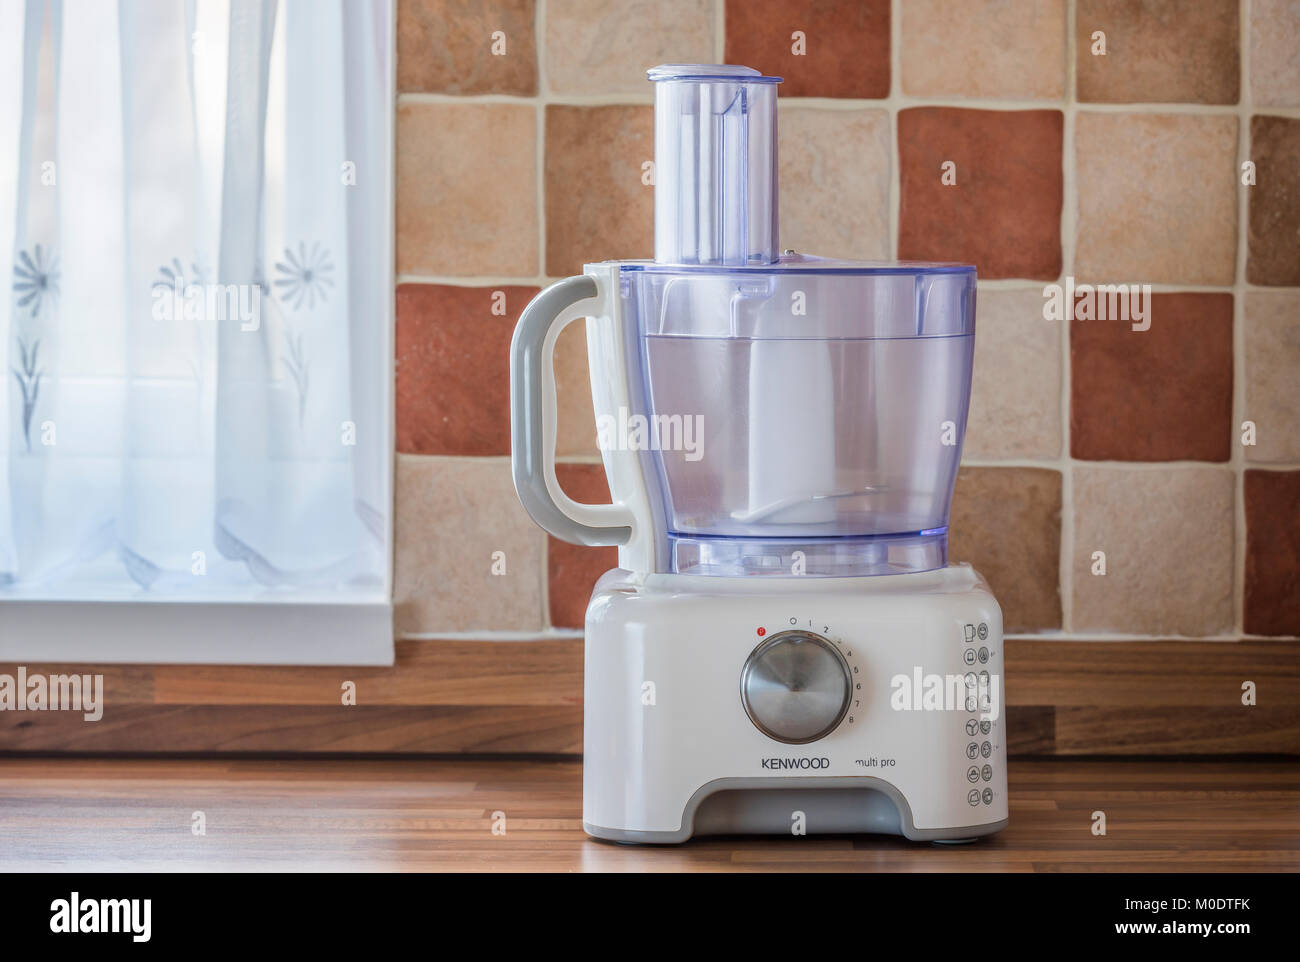 Kenwood multi pro food mixer or processor, on kitchen worktop with tiled background. Houshold electrical appliance. Stock Photo